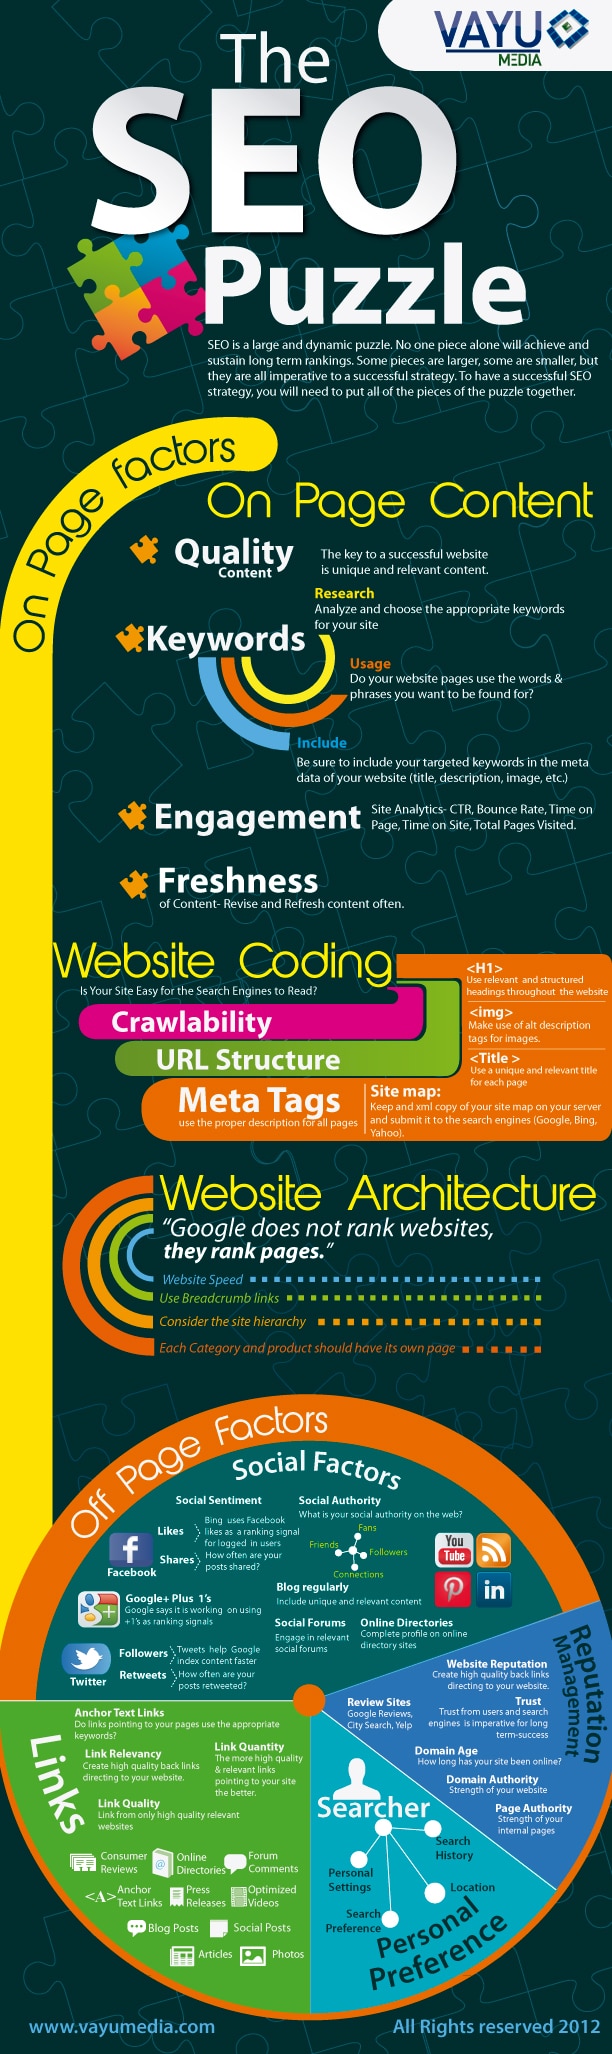 the-seo-puzzle-infographic